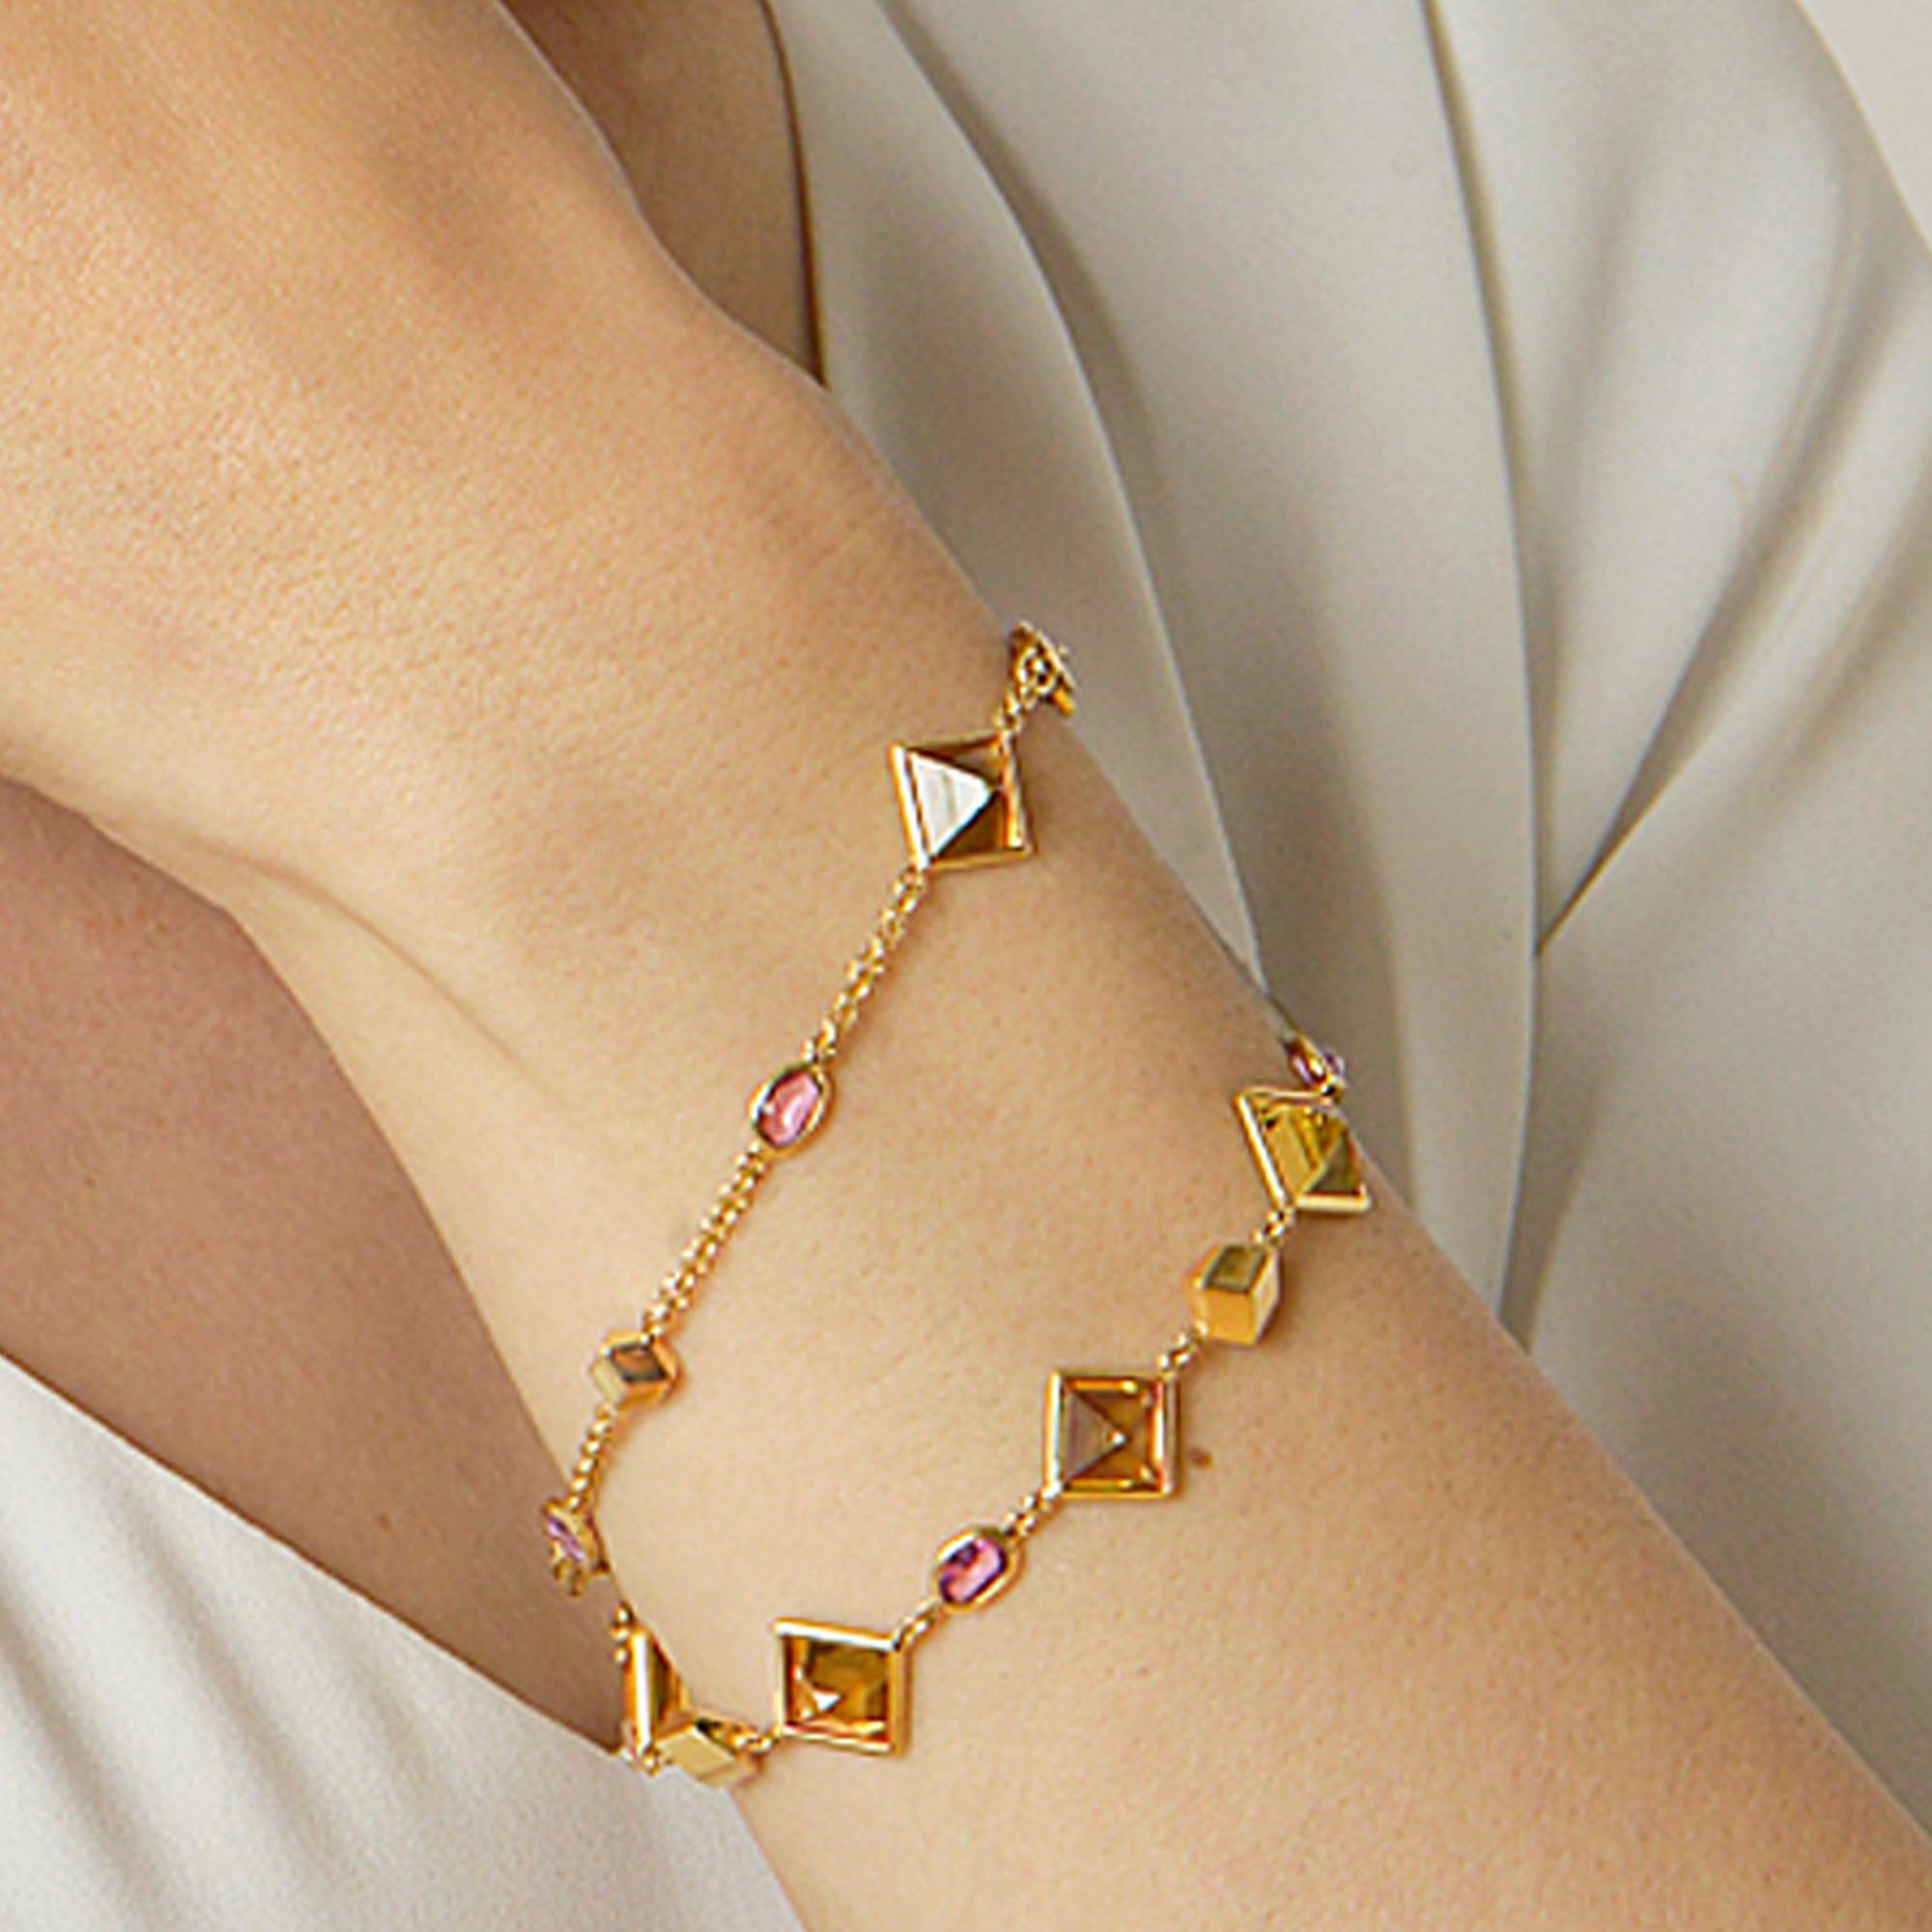 Emerald Cut Paolo Costagli 18K Yellow Gold Florentine Bracelet with Citrine & Pink Sapphire  For Sale